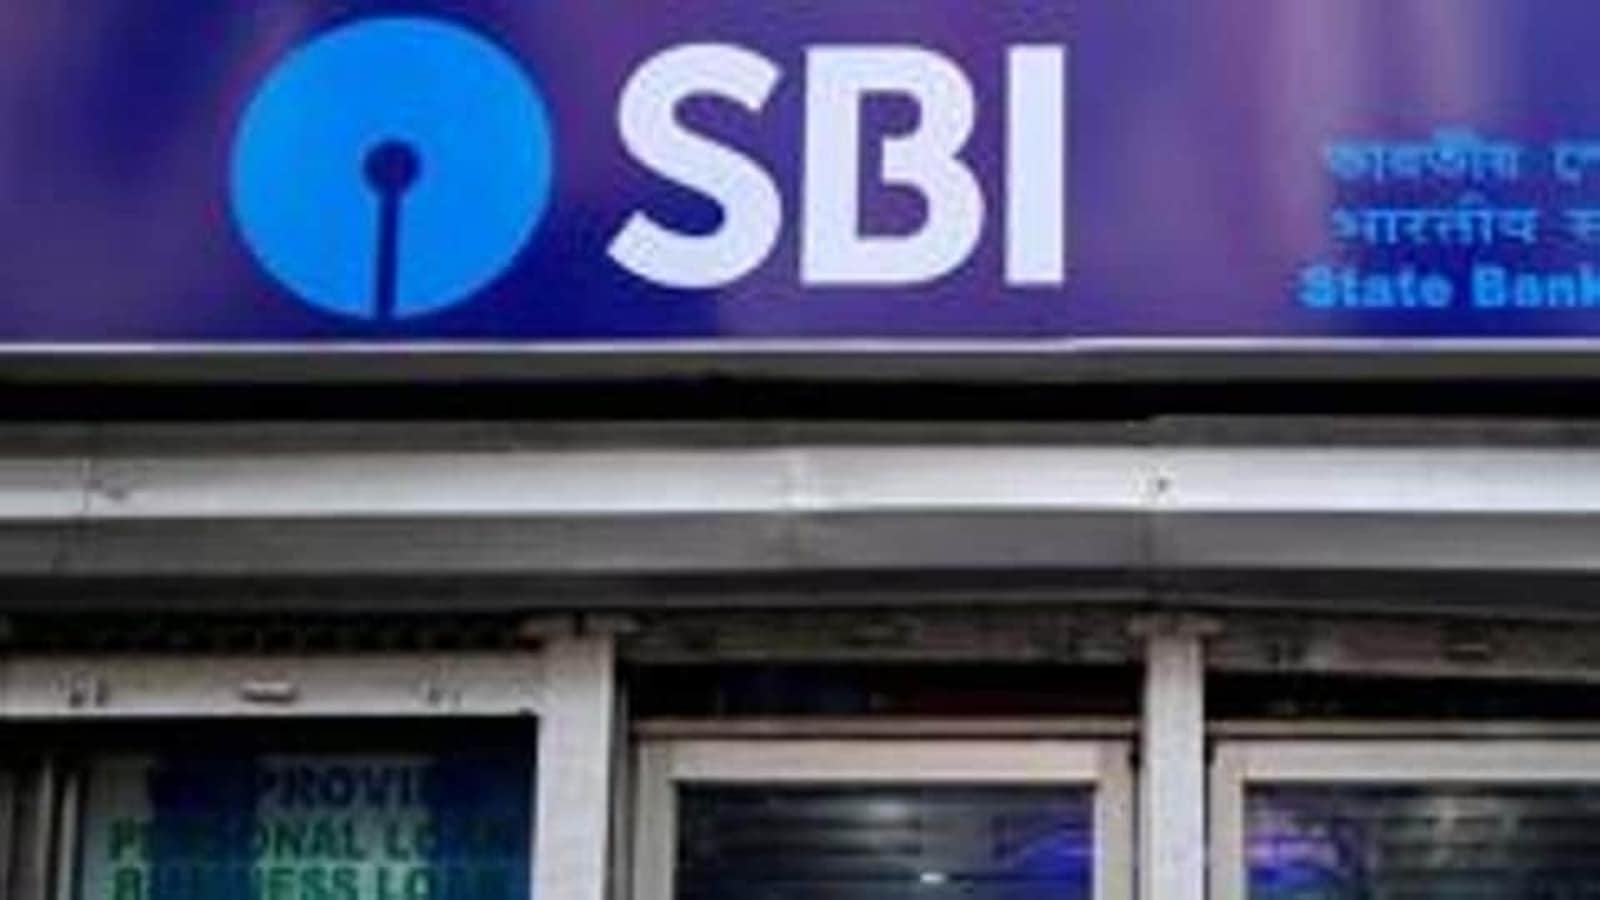 SBI SCO recruitment 2022: Last date to apply for 32 SCO posts